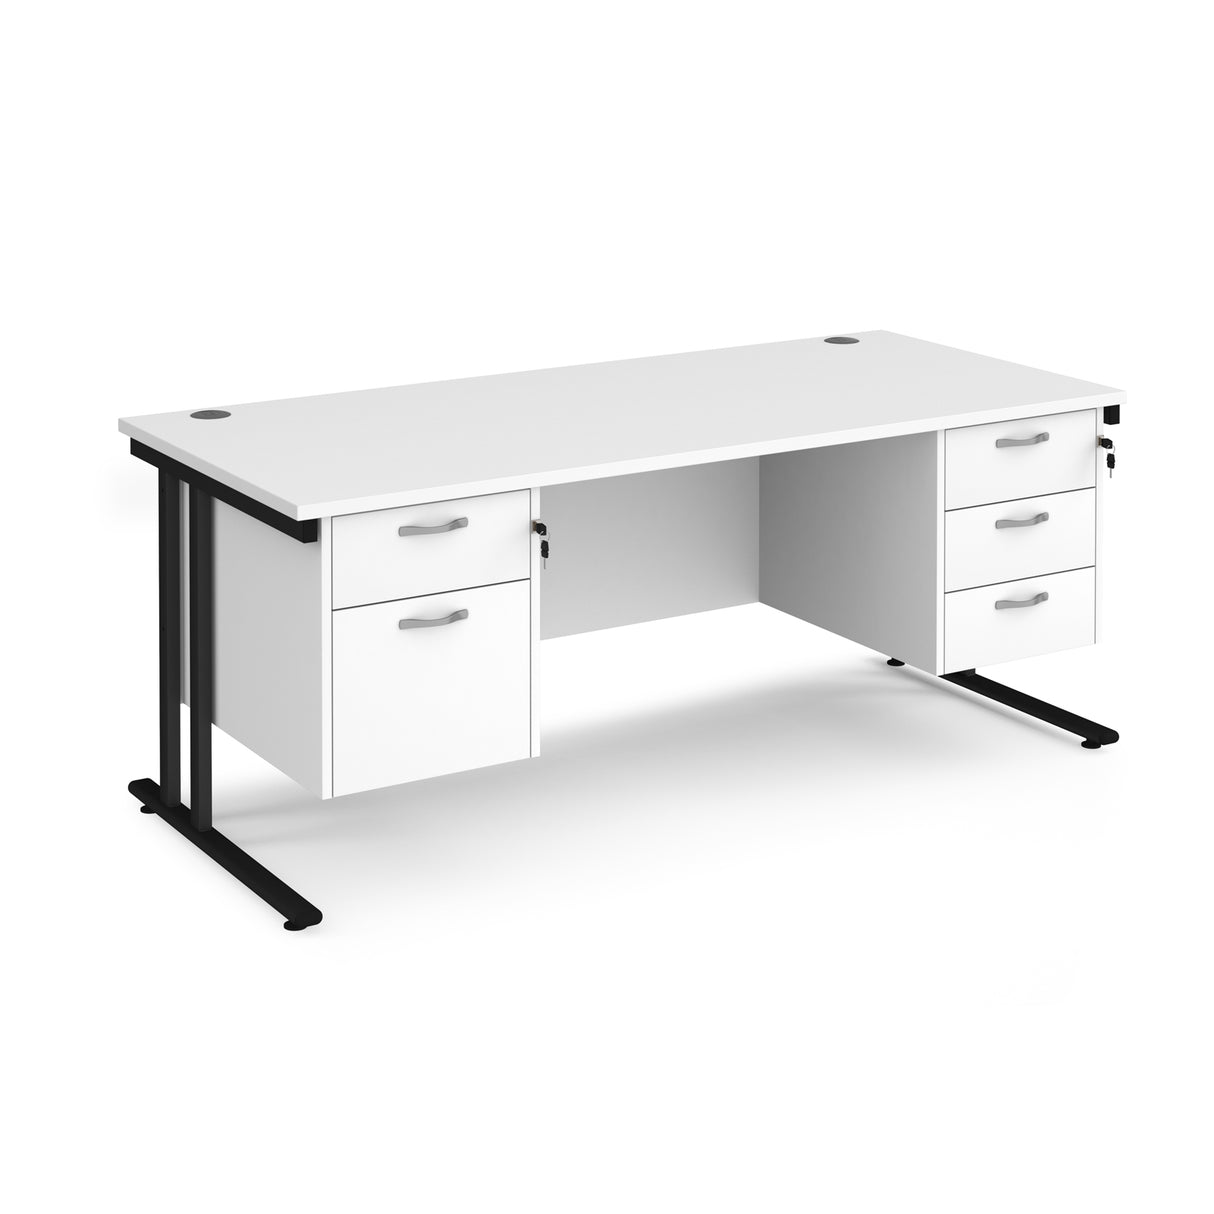 Maestro 800mm Deep Straight Cantilever Leg Office Desk with Three and Two Drawer Pedestal